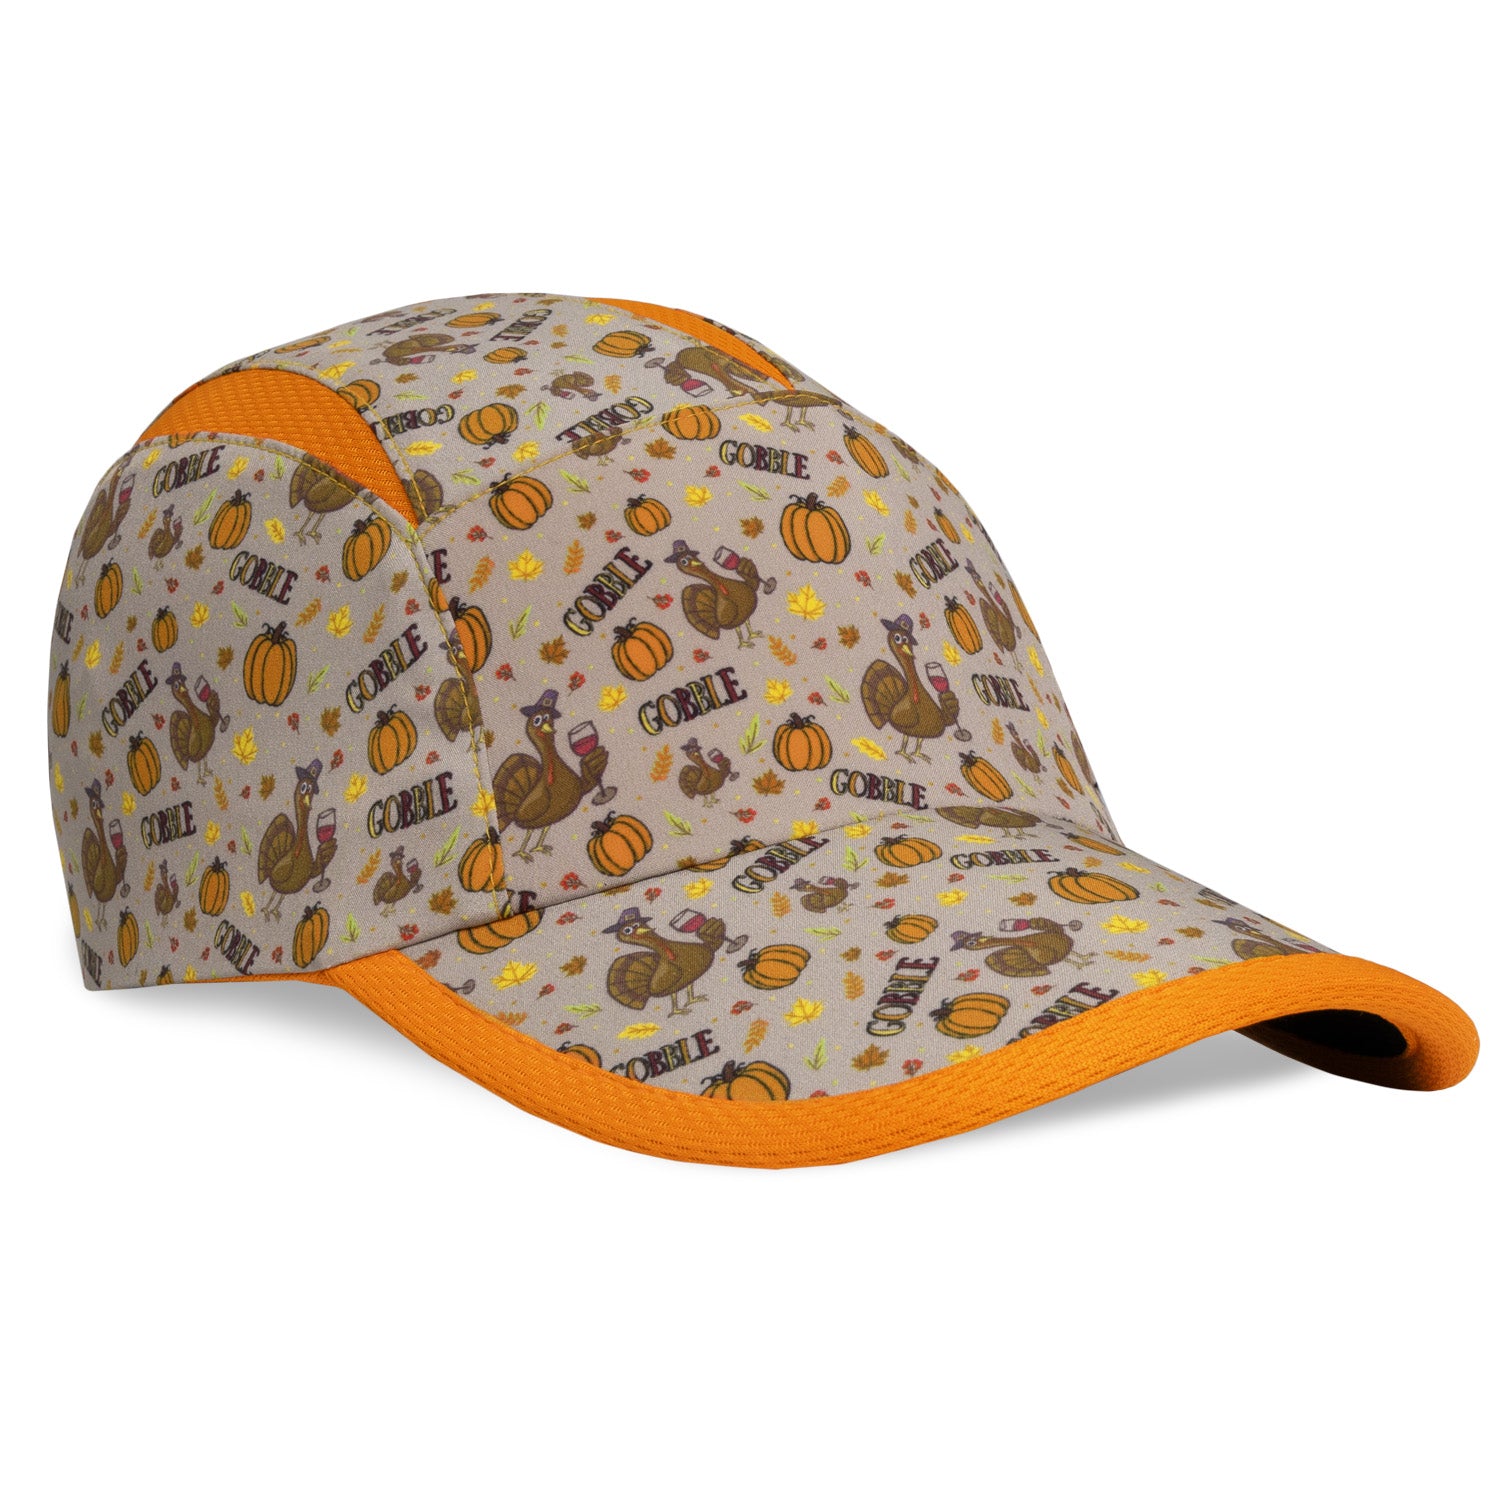 Turkey Trot Running Hat Right Side View